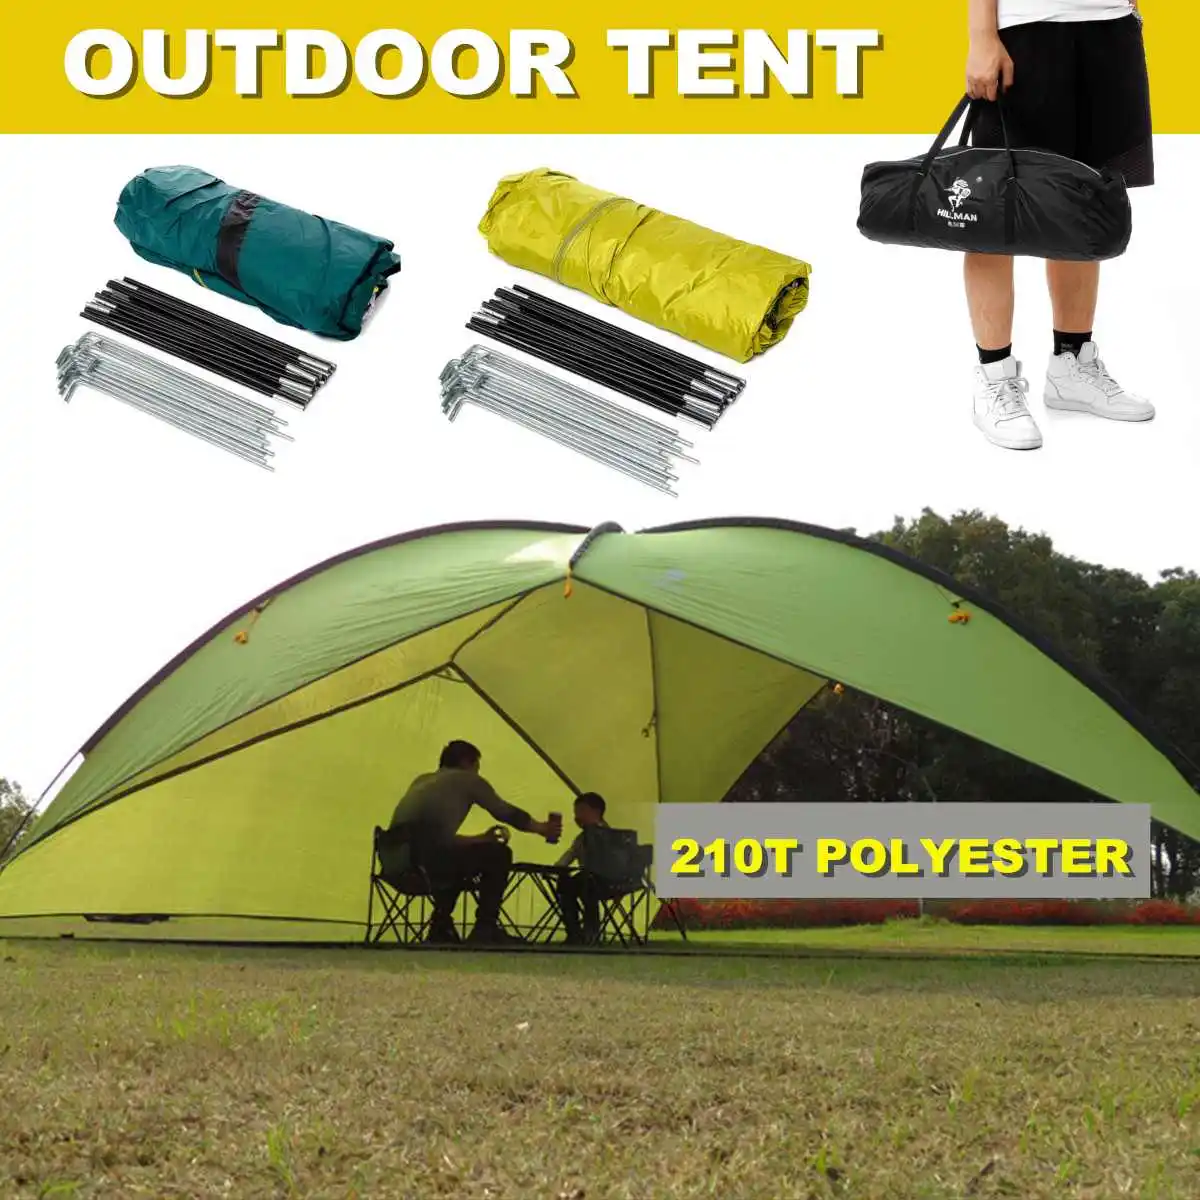 

4.8m 210T Polyester Triangle Shelter Outdoor Camping Tent Large Beach Canopy UV Sun Shade With Storage Bag Portable Tents